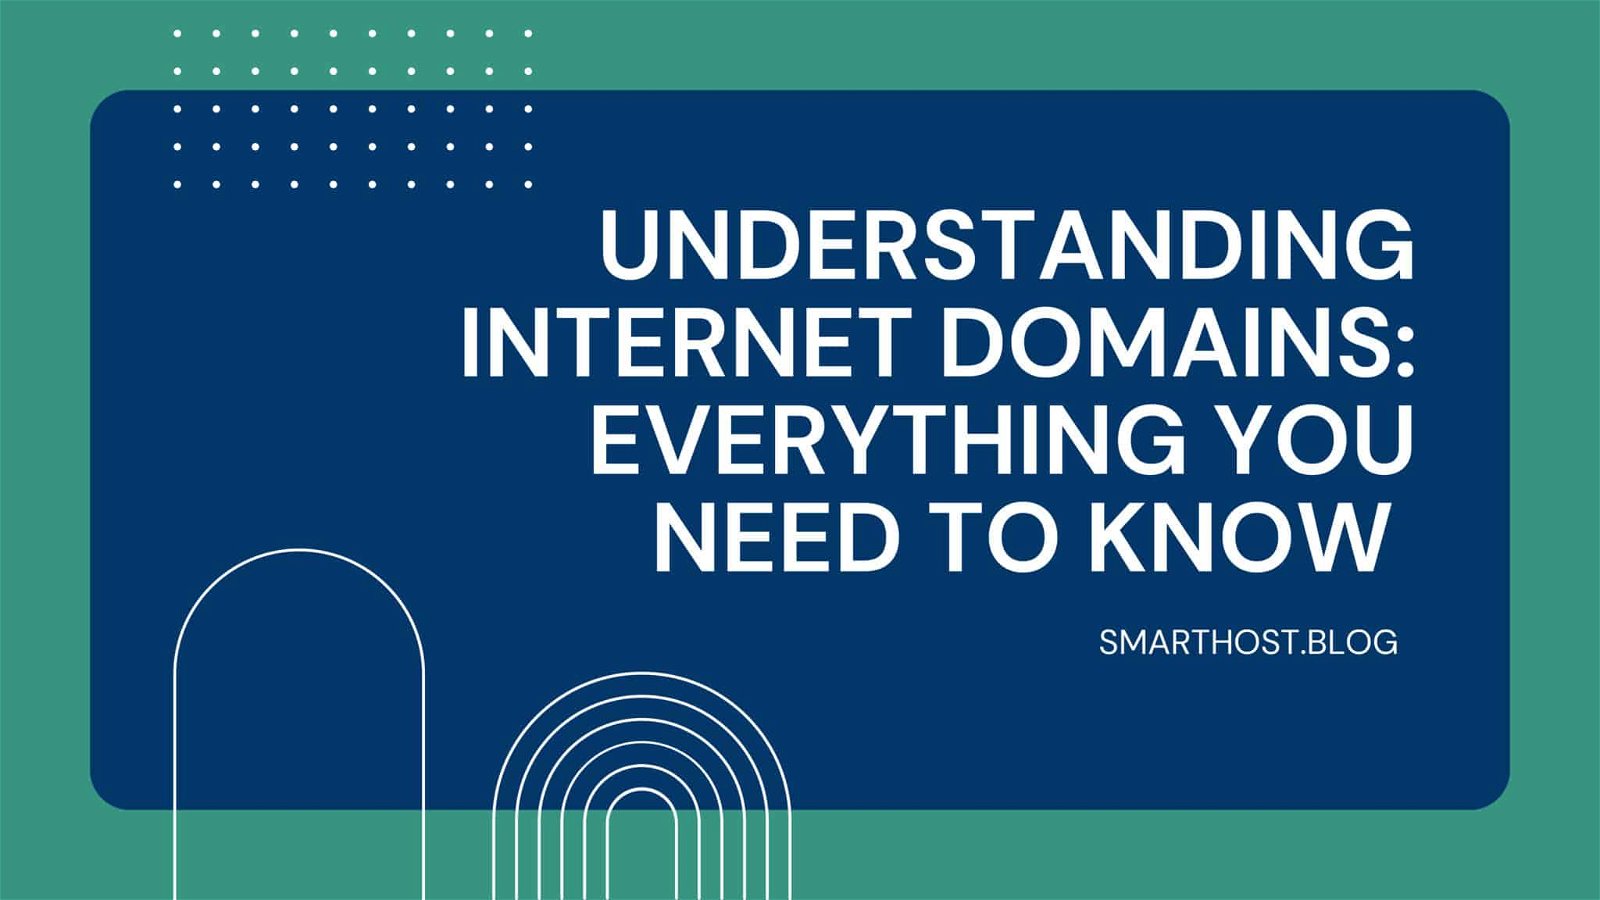 In this image, a blog post is being presented that provides information on understanding internet domains.